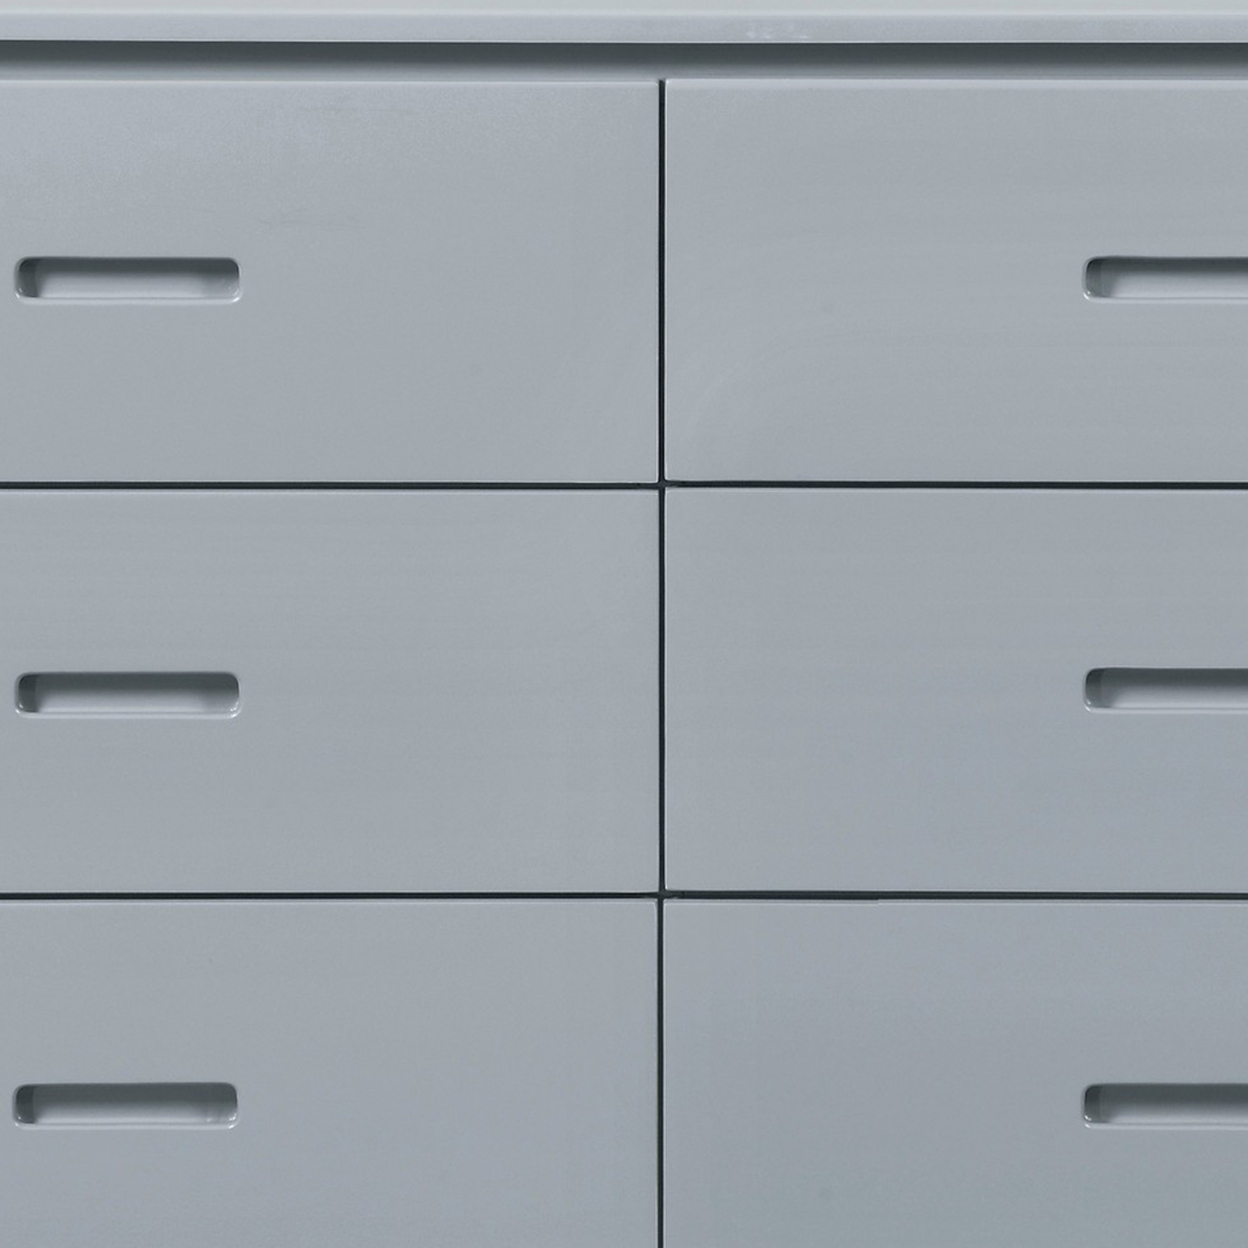 Transitional Wooden Dresser With 6 Drawers And Recessed Handles, Gray- Saltoro Sherpi